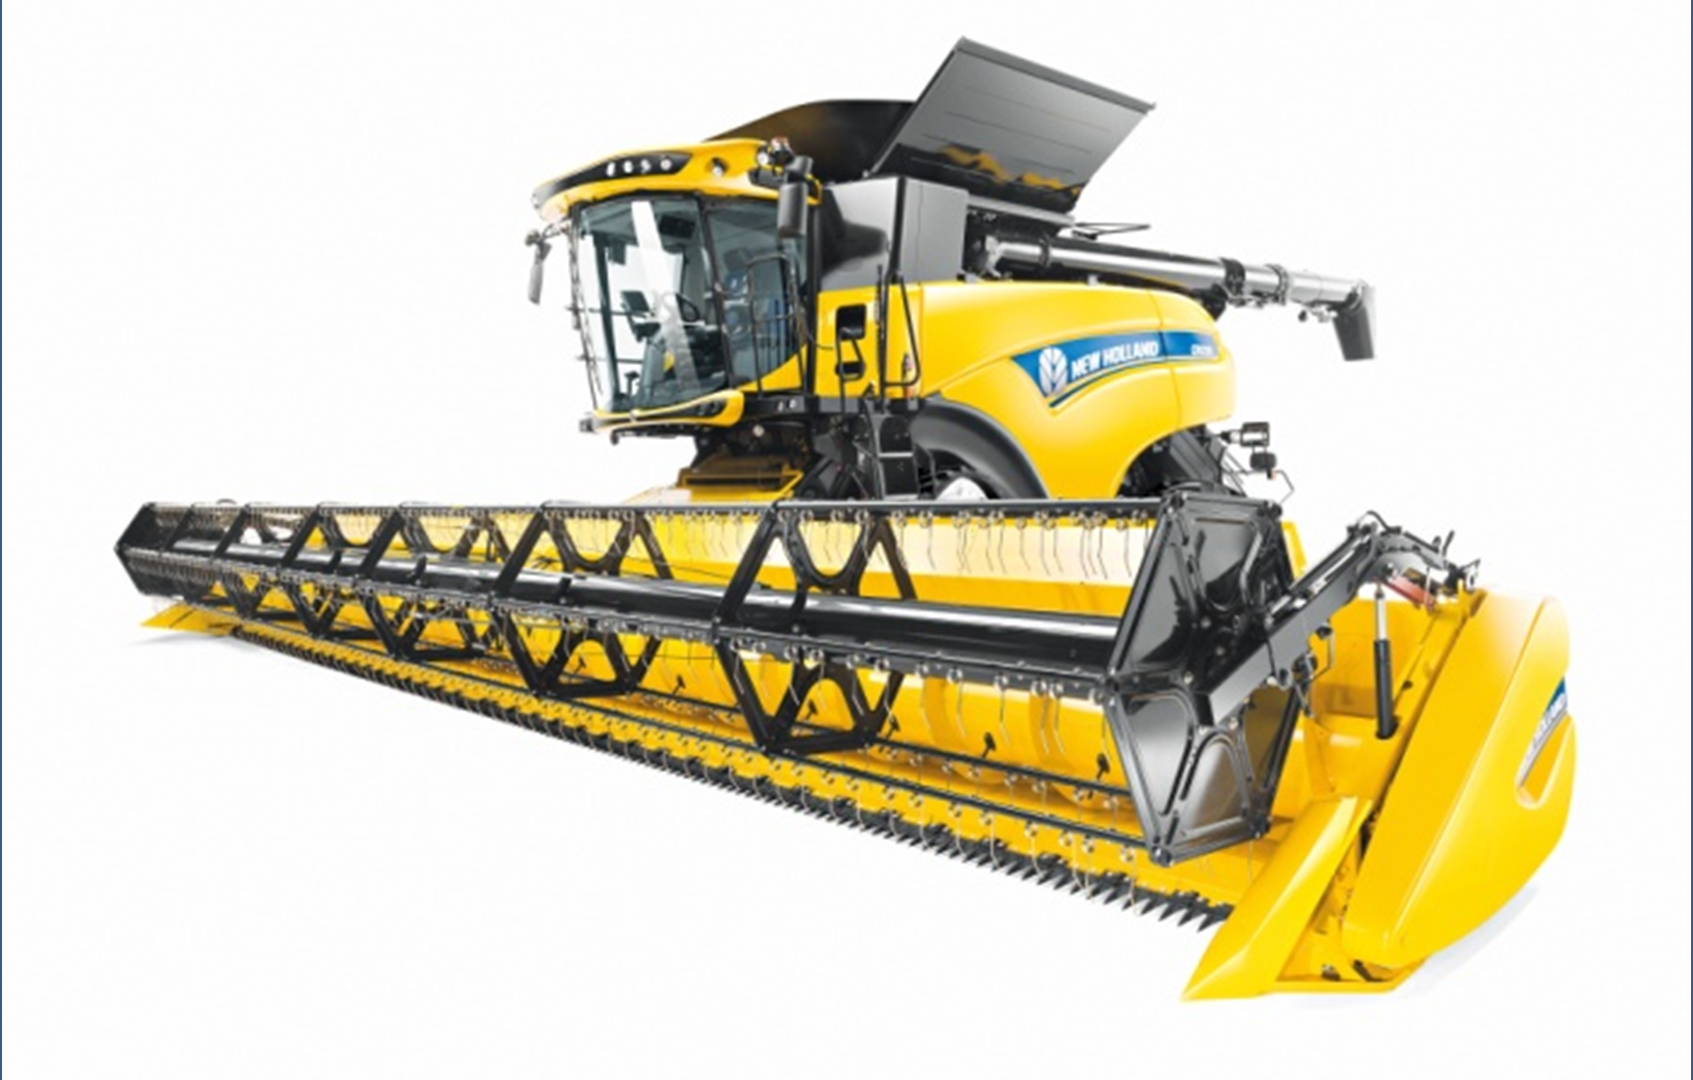 New Holland’s new CR Series combines raise harvesting to a whole new level